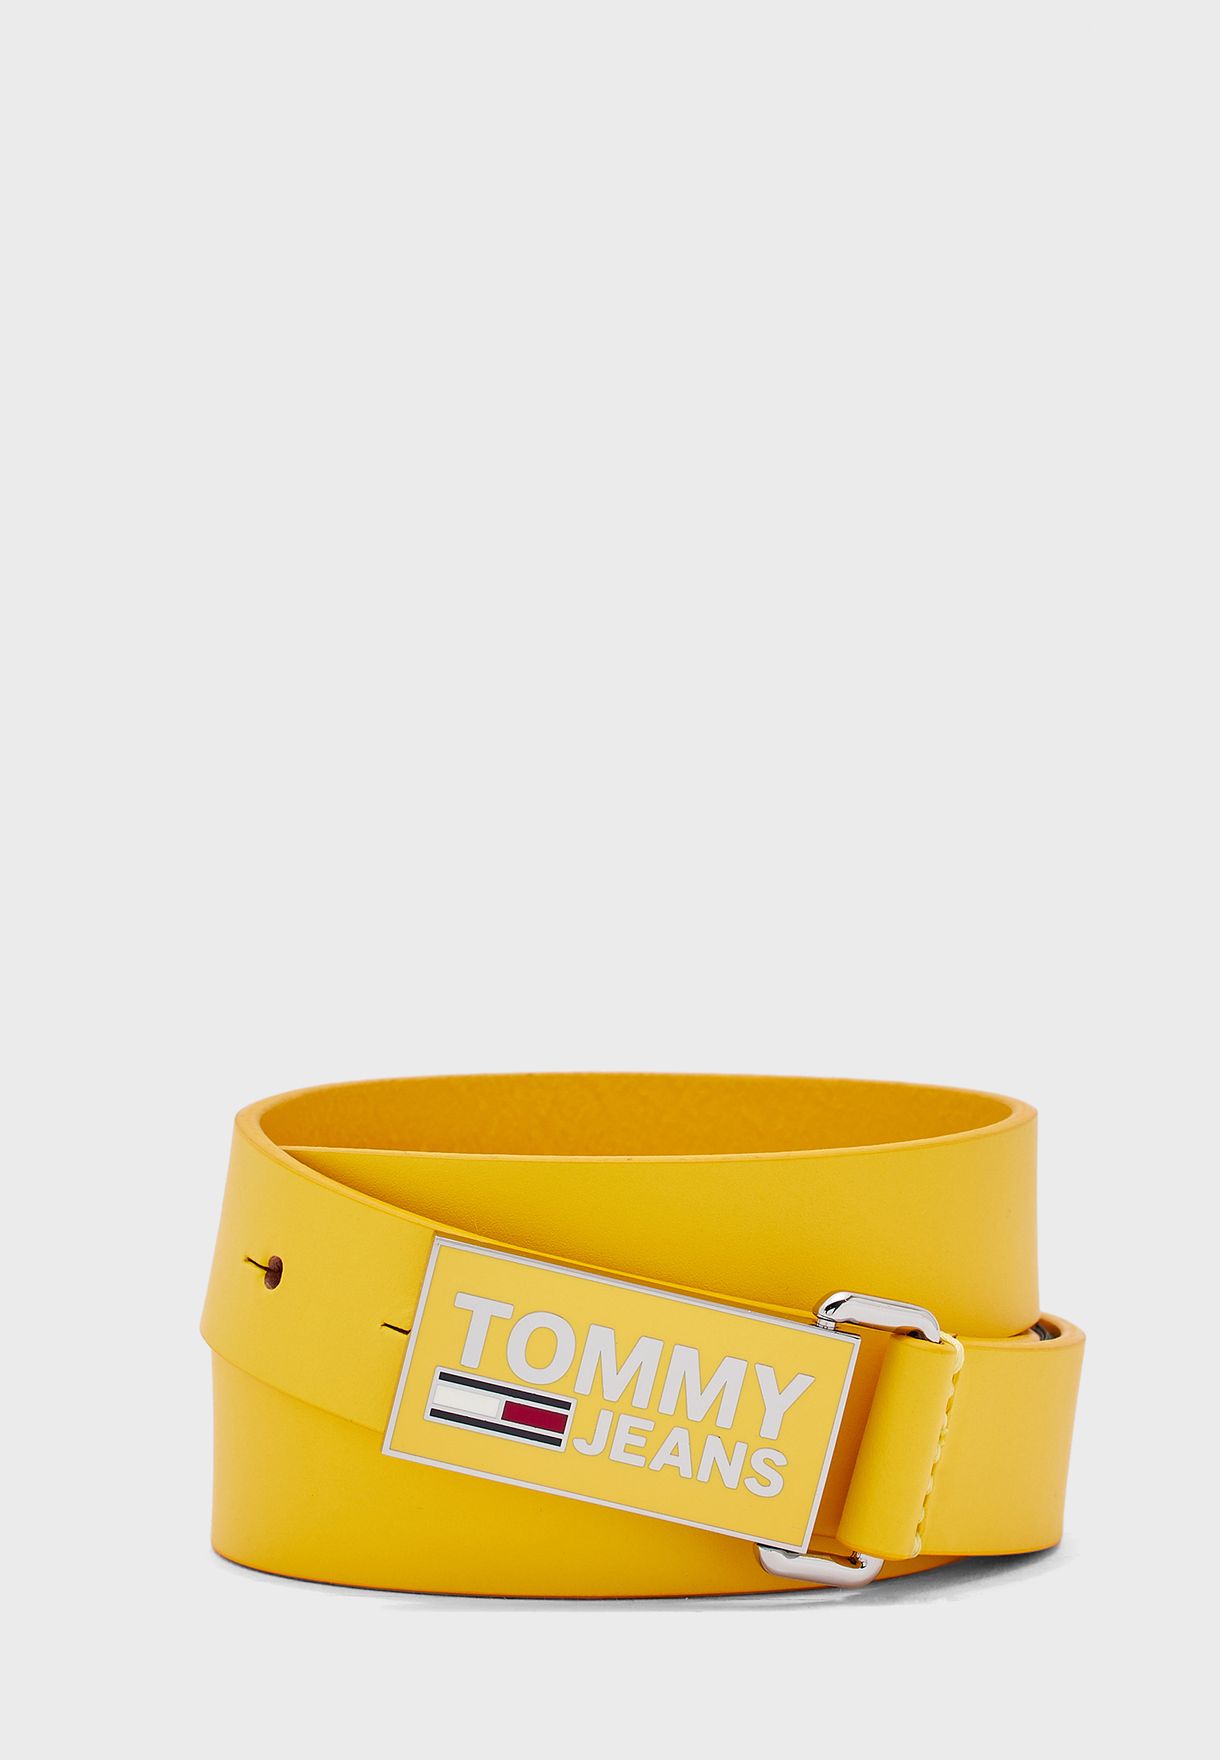 tommy jeans belt yellow